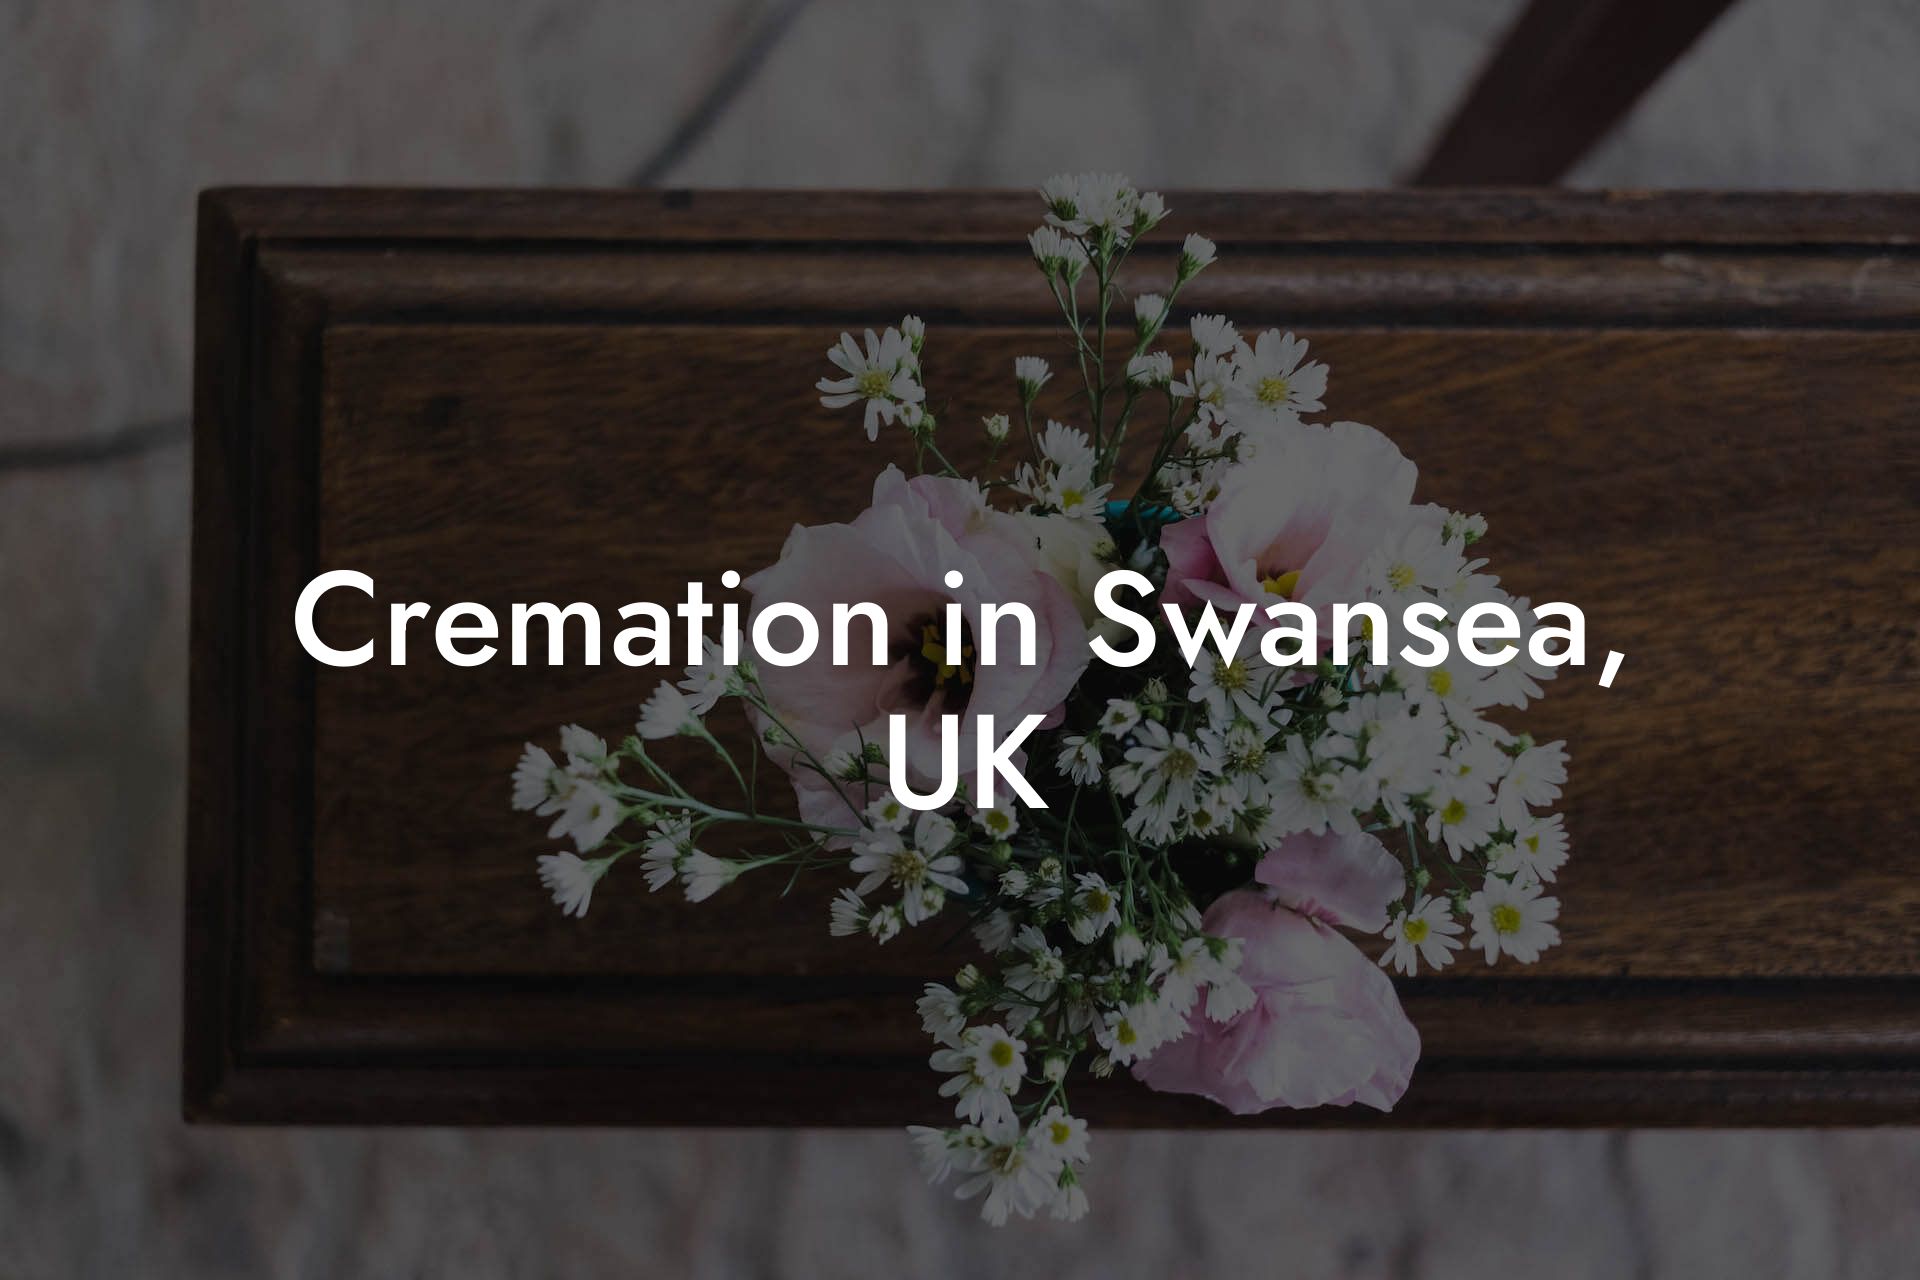 Cremation in Swansea, UK